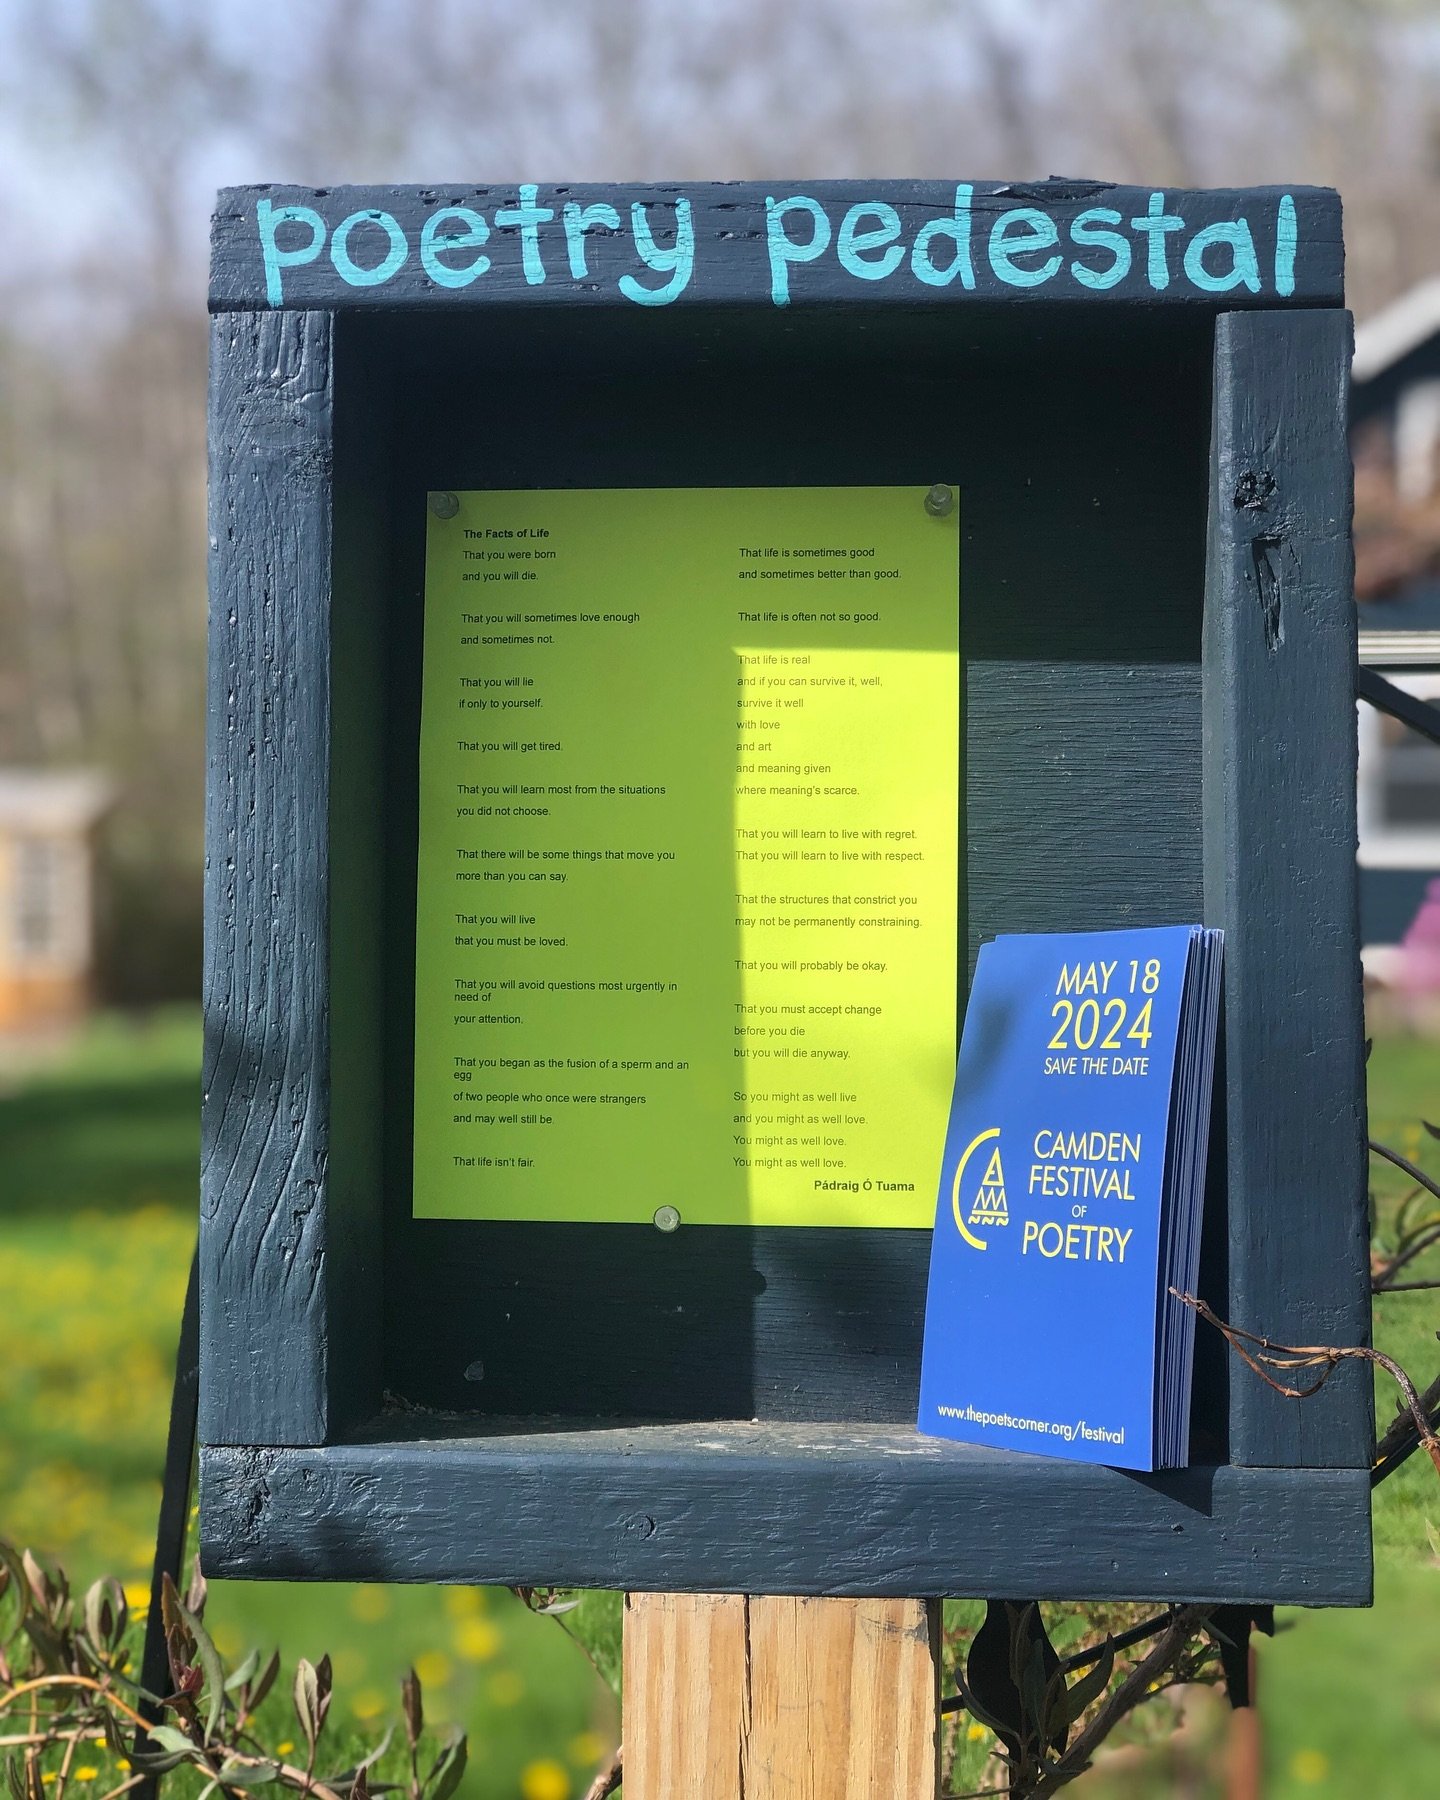 @padraigotuama on our Poetry Pedestal AND in Camden next weekend at the @camdenfestivalofpoetry ☀️ Saturday May 18 at the First Congregational Church in Camden, Maine. 

The Facts of Life by P&aacute;draig &Oacute; Tuama
 
That you were born
and you 